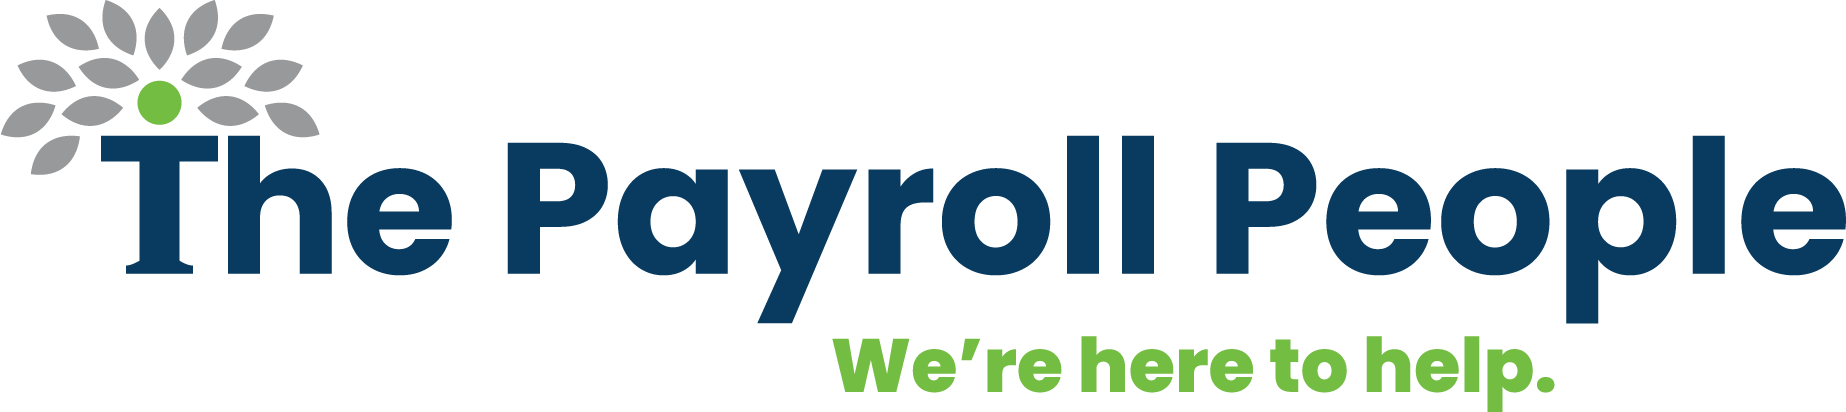 The Payroll People Logo